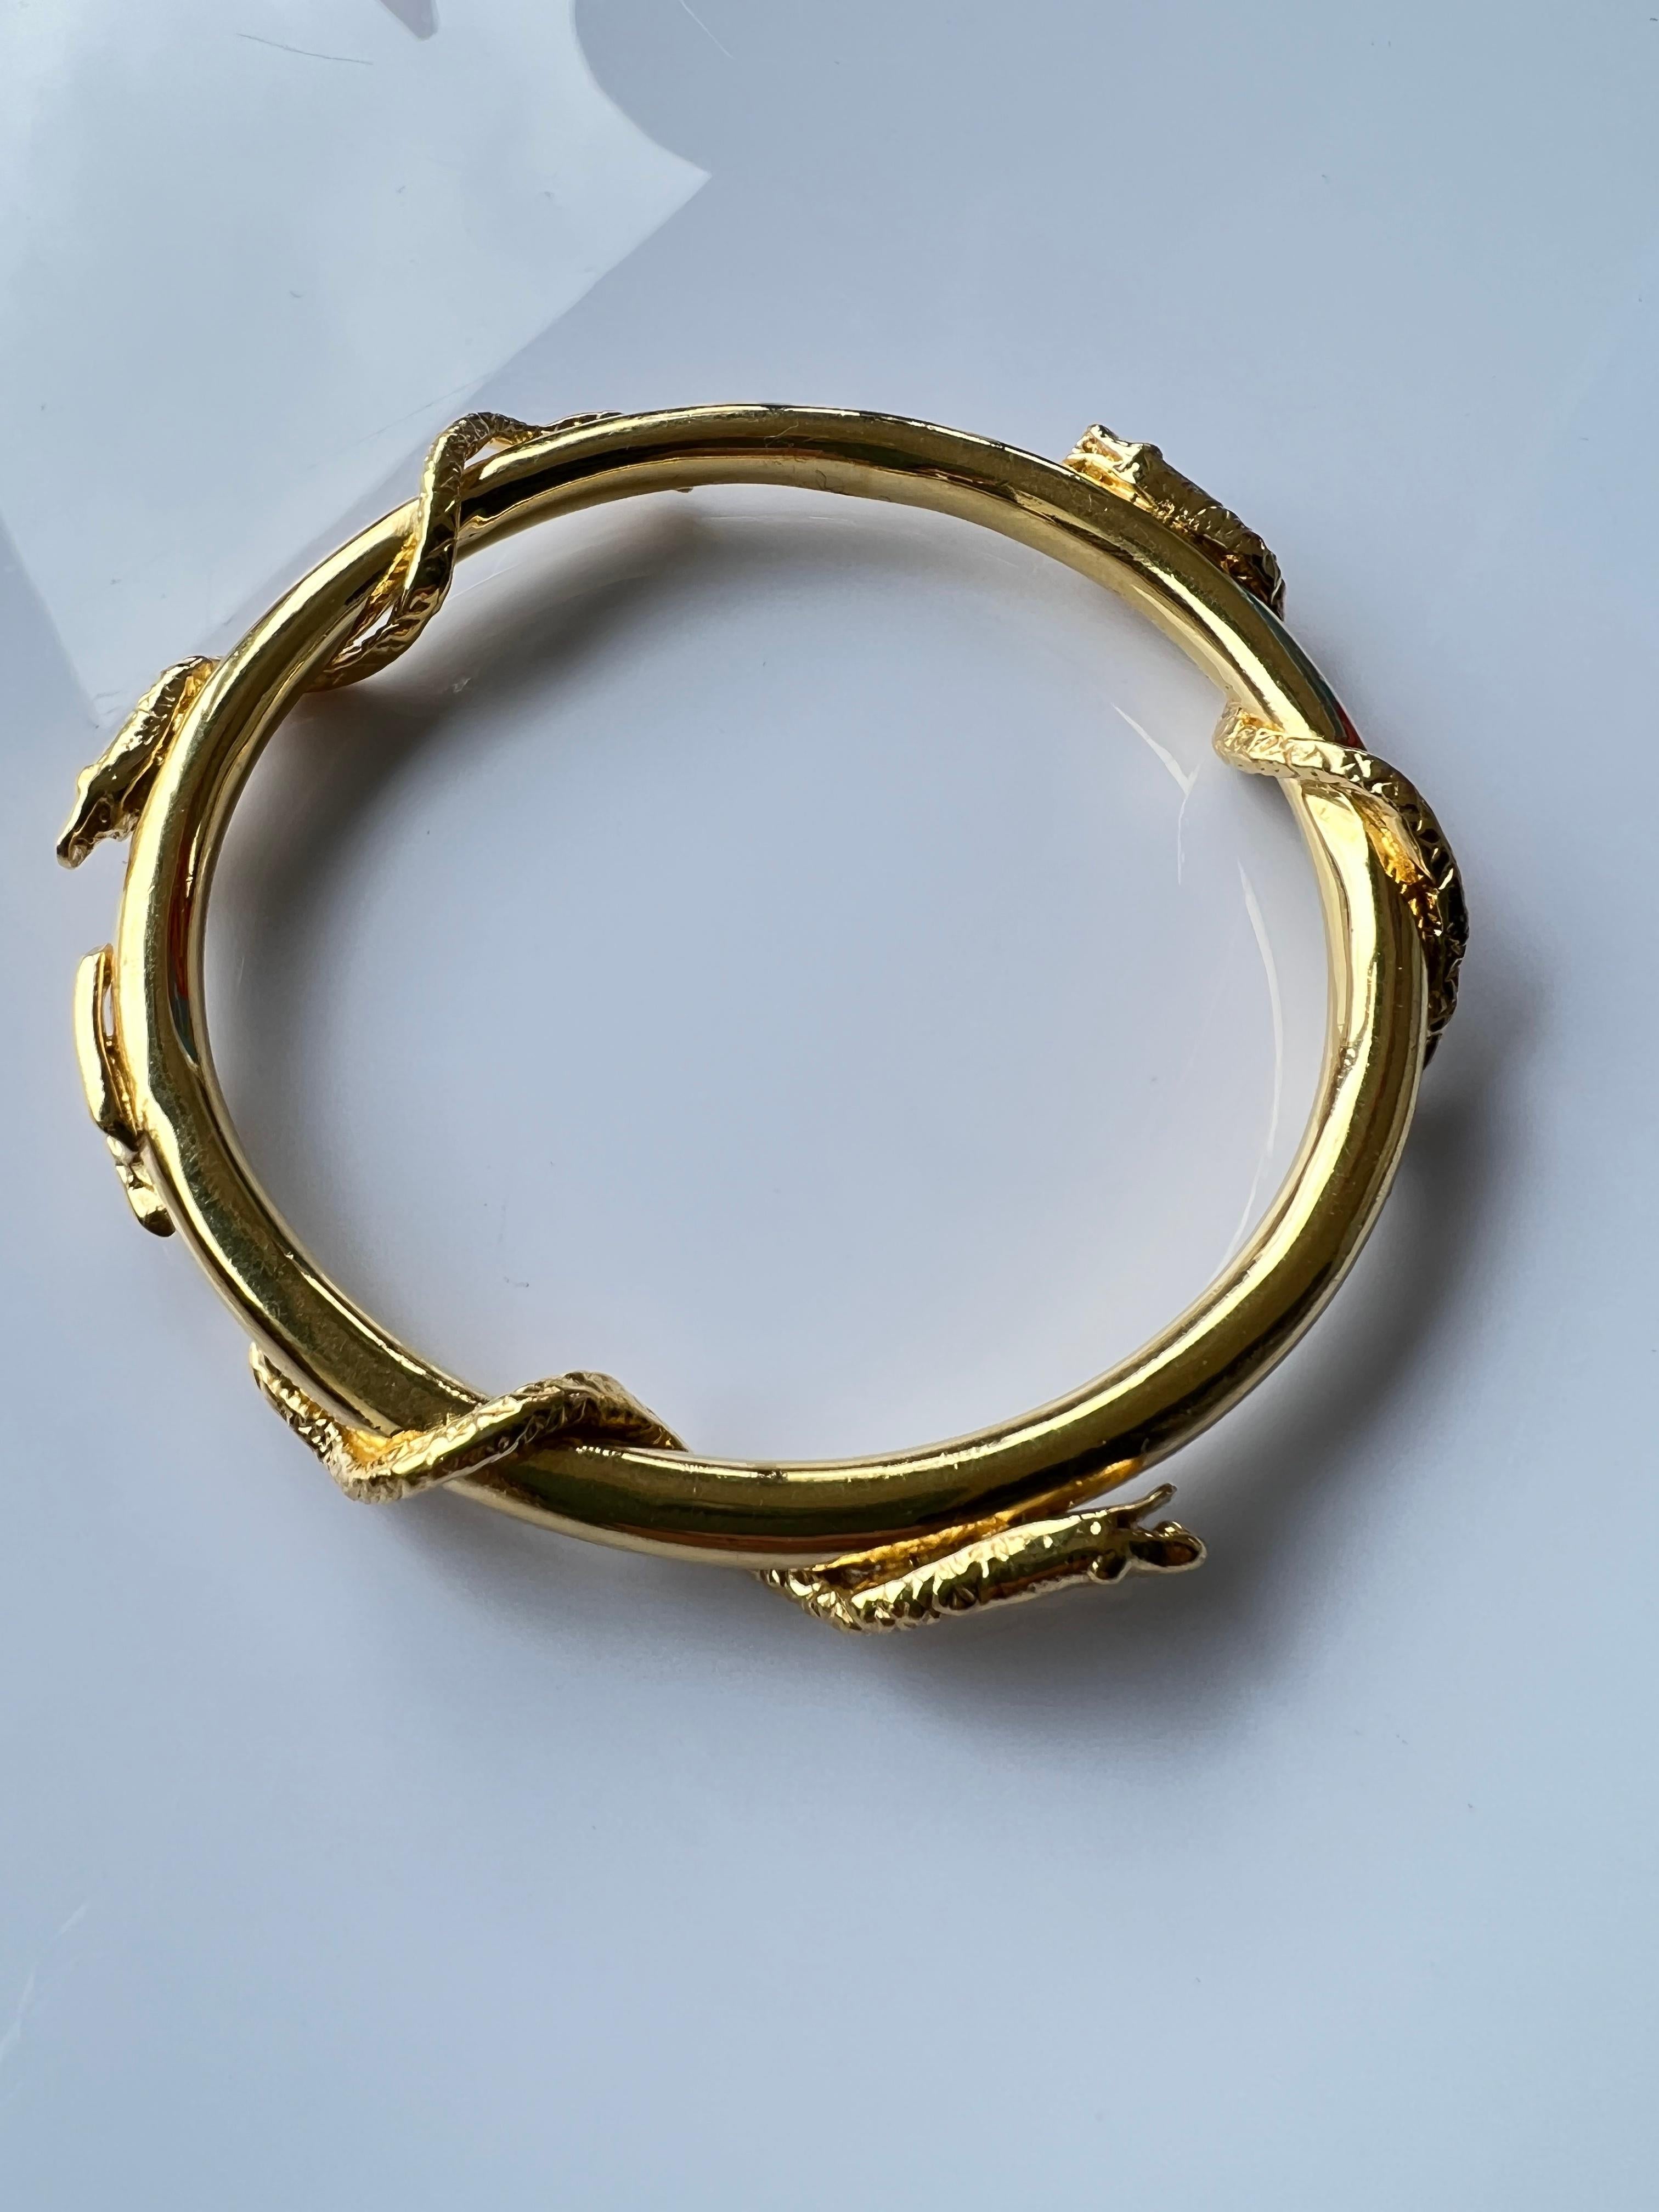 Snake Bangle Bracelet Victorian Style Gold Plated J Dauphin For Sale 2